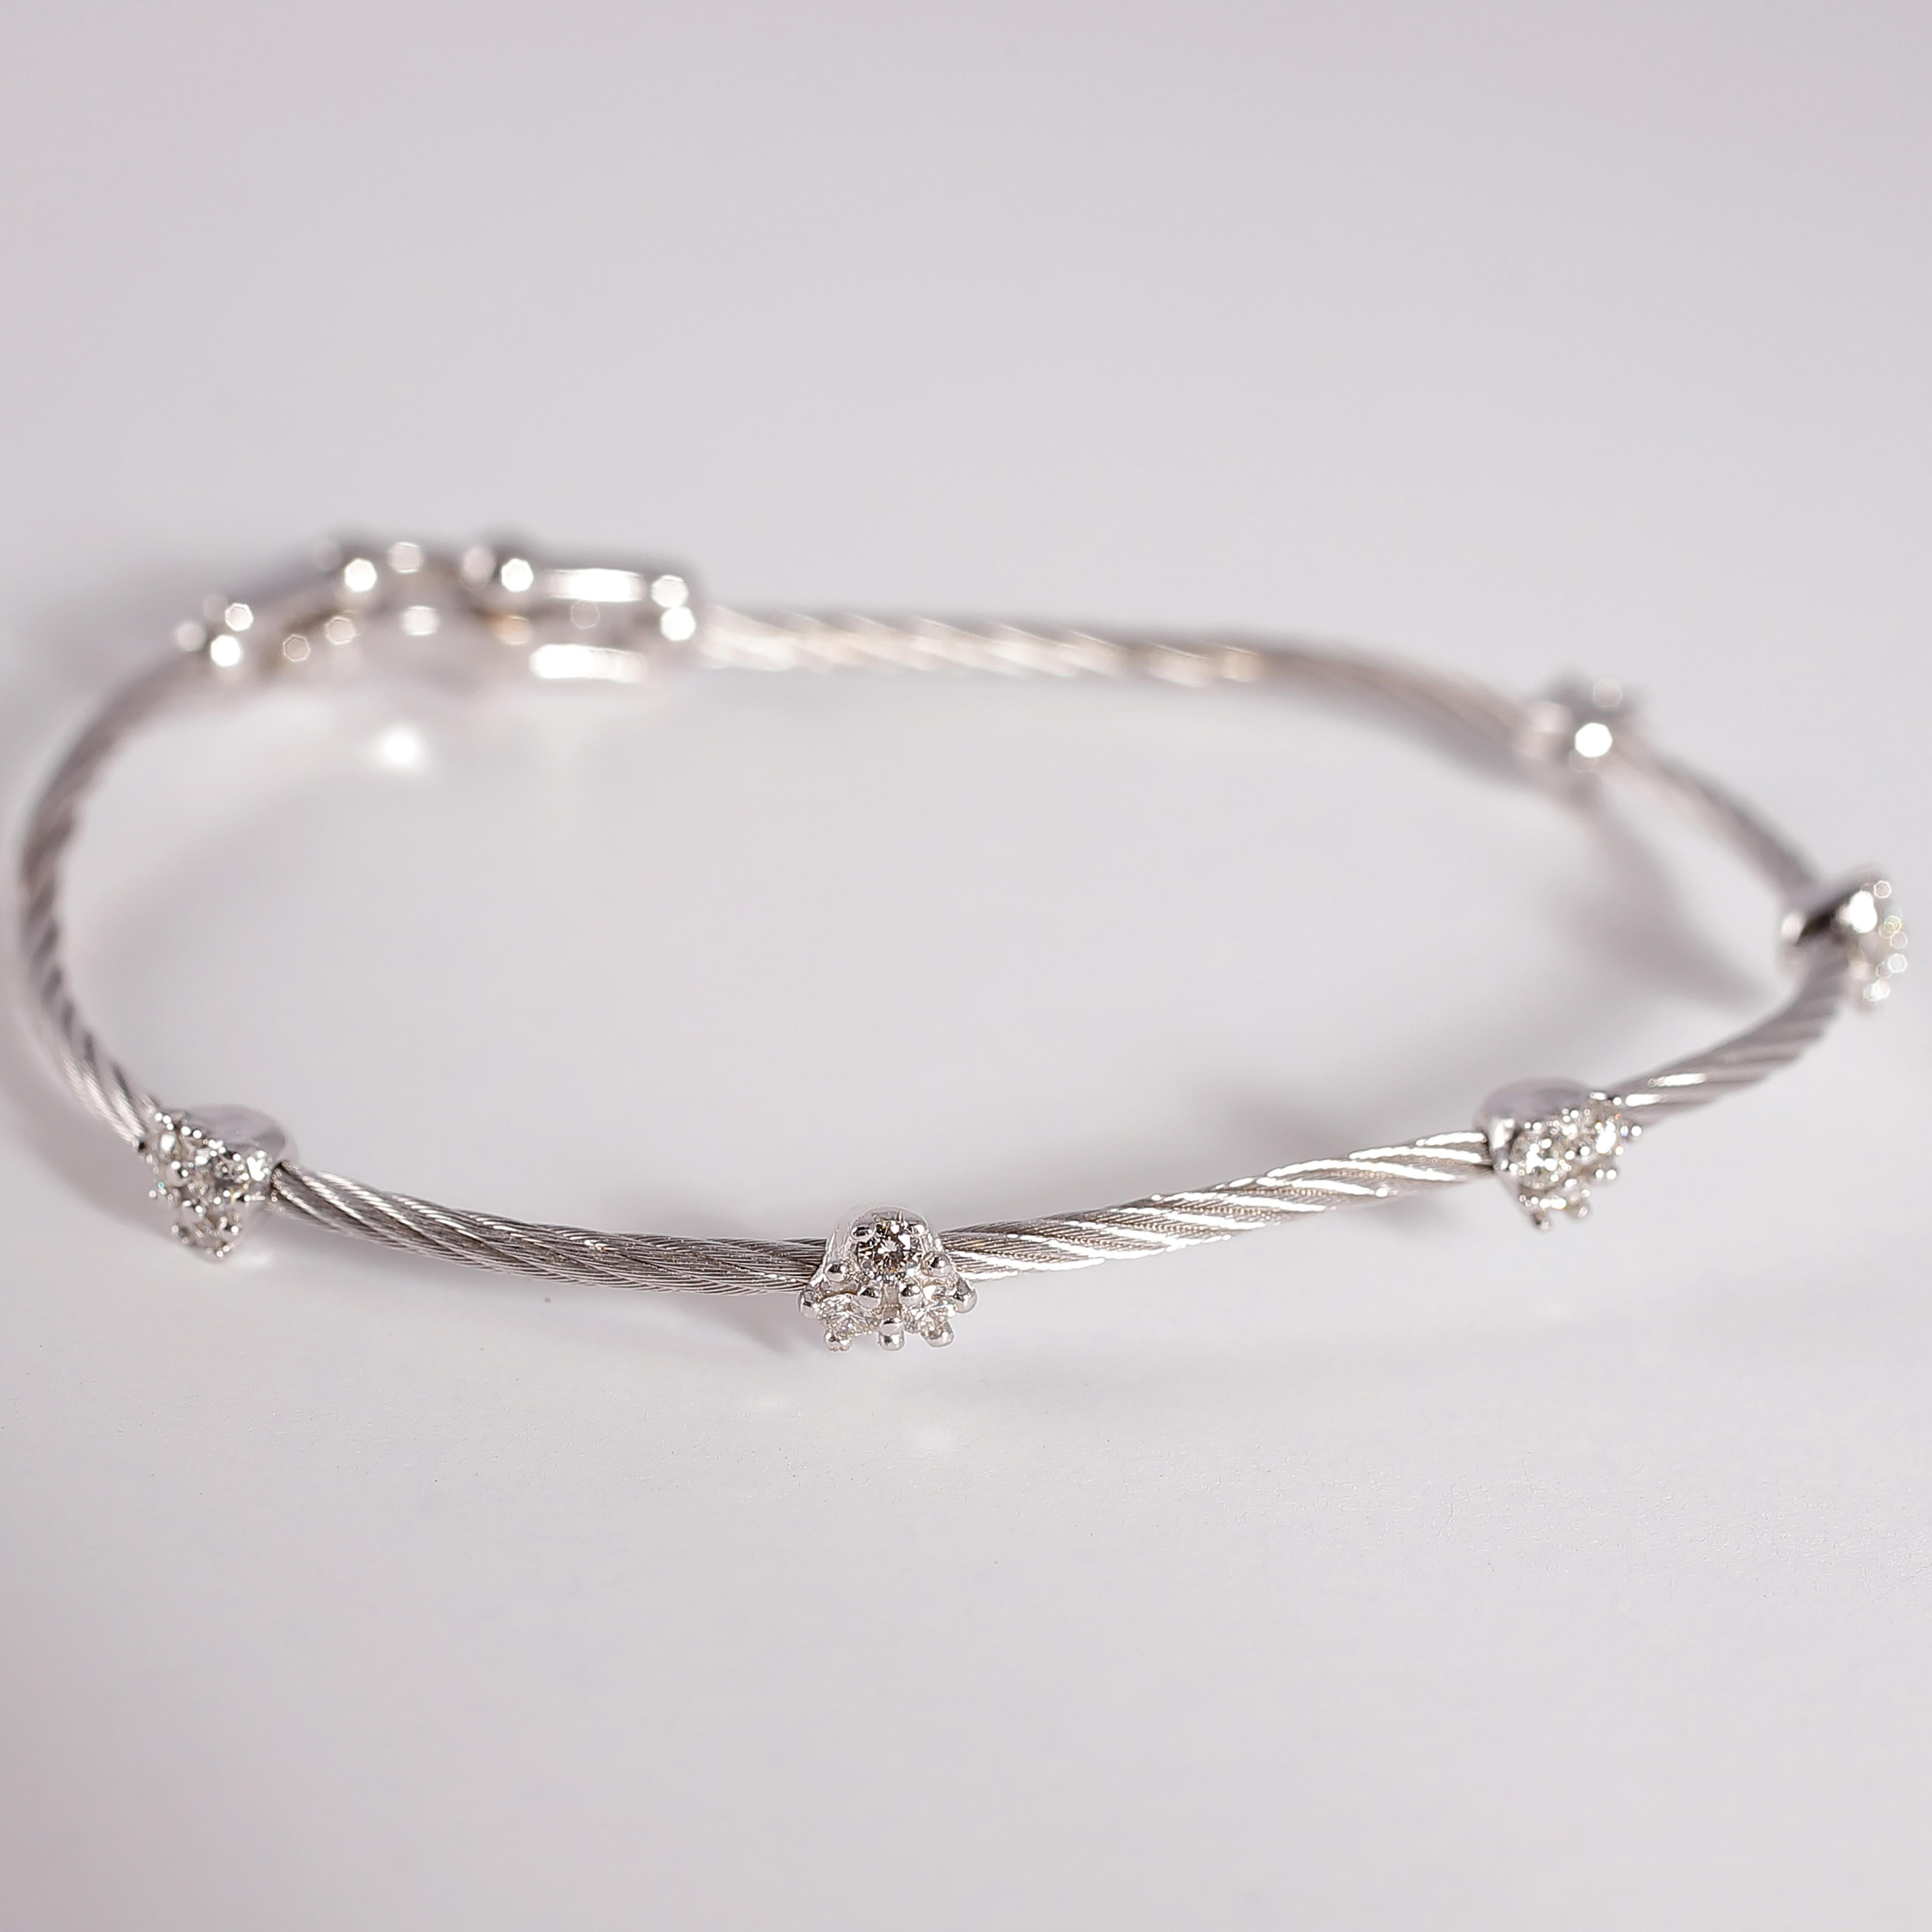 Women's or Men's Paul Morelli Diamond Bracelet from the Cluster Collection